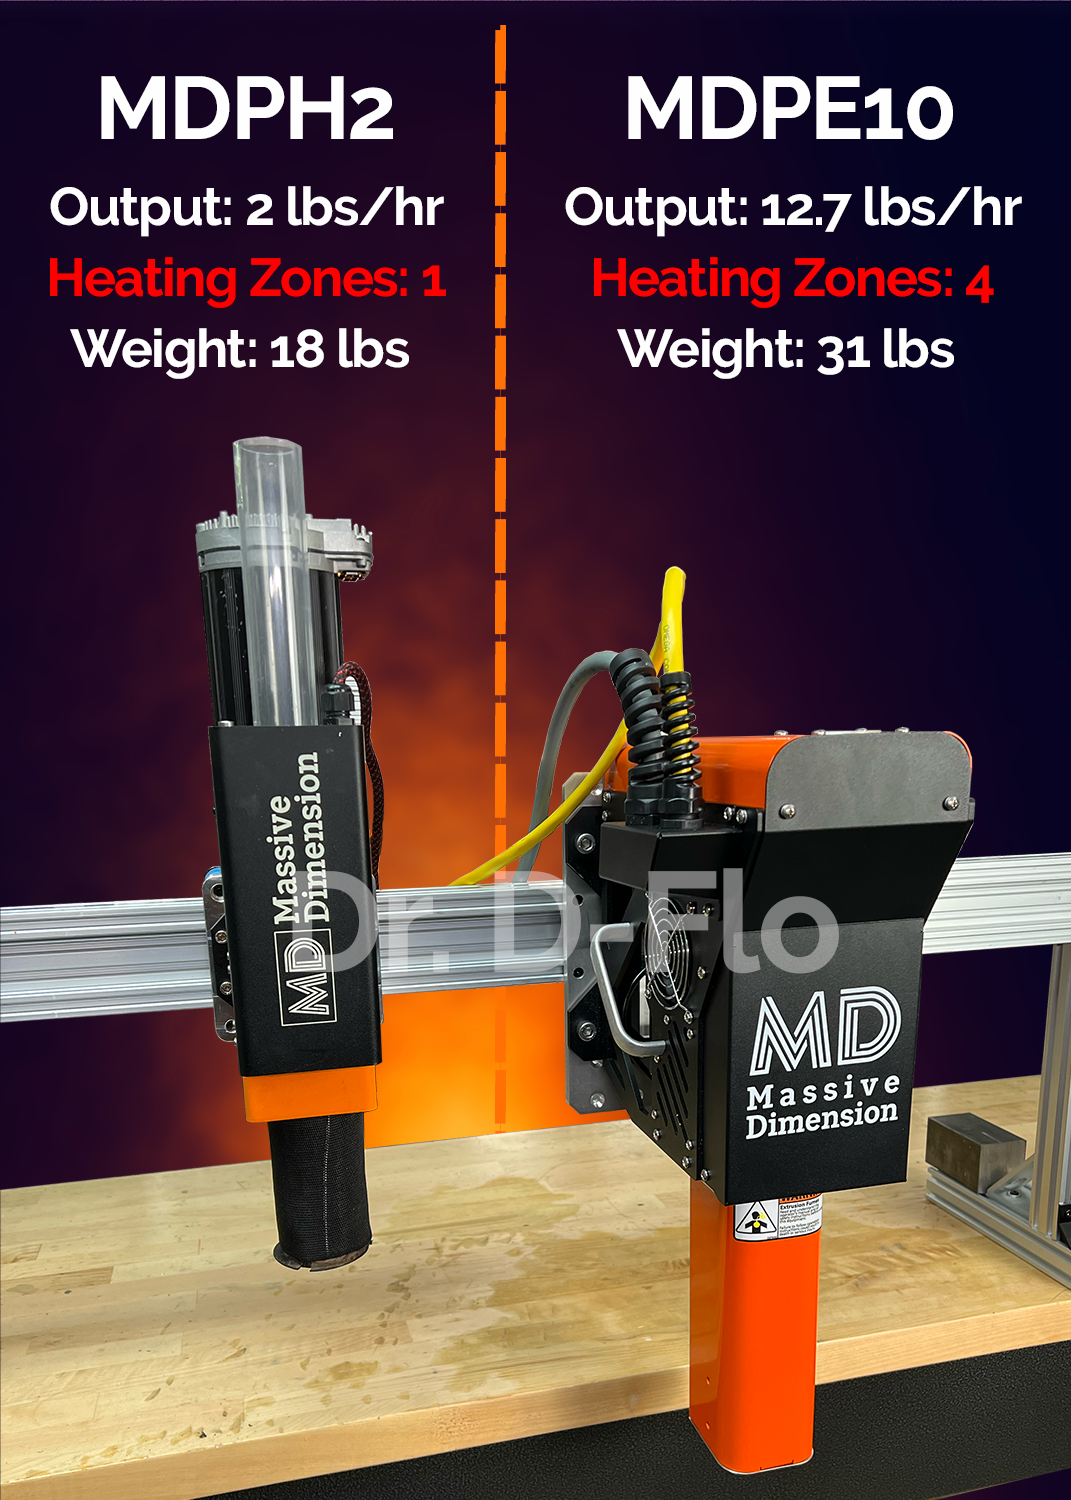 Comparing two seperate screw extruders for large format 3d printing (MDPH2 and MPDE10)